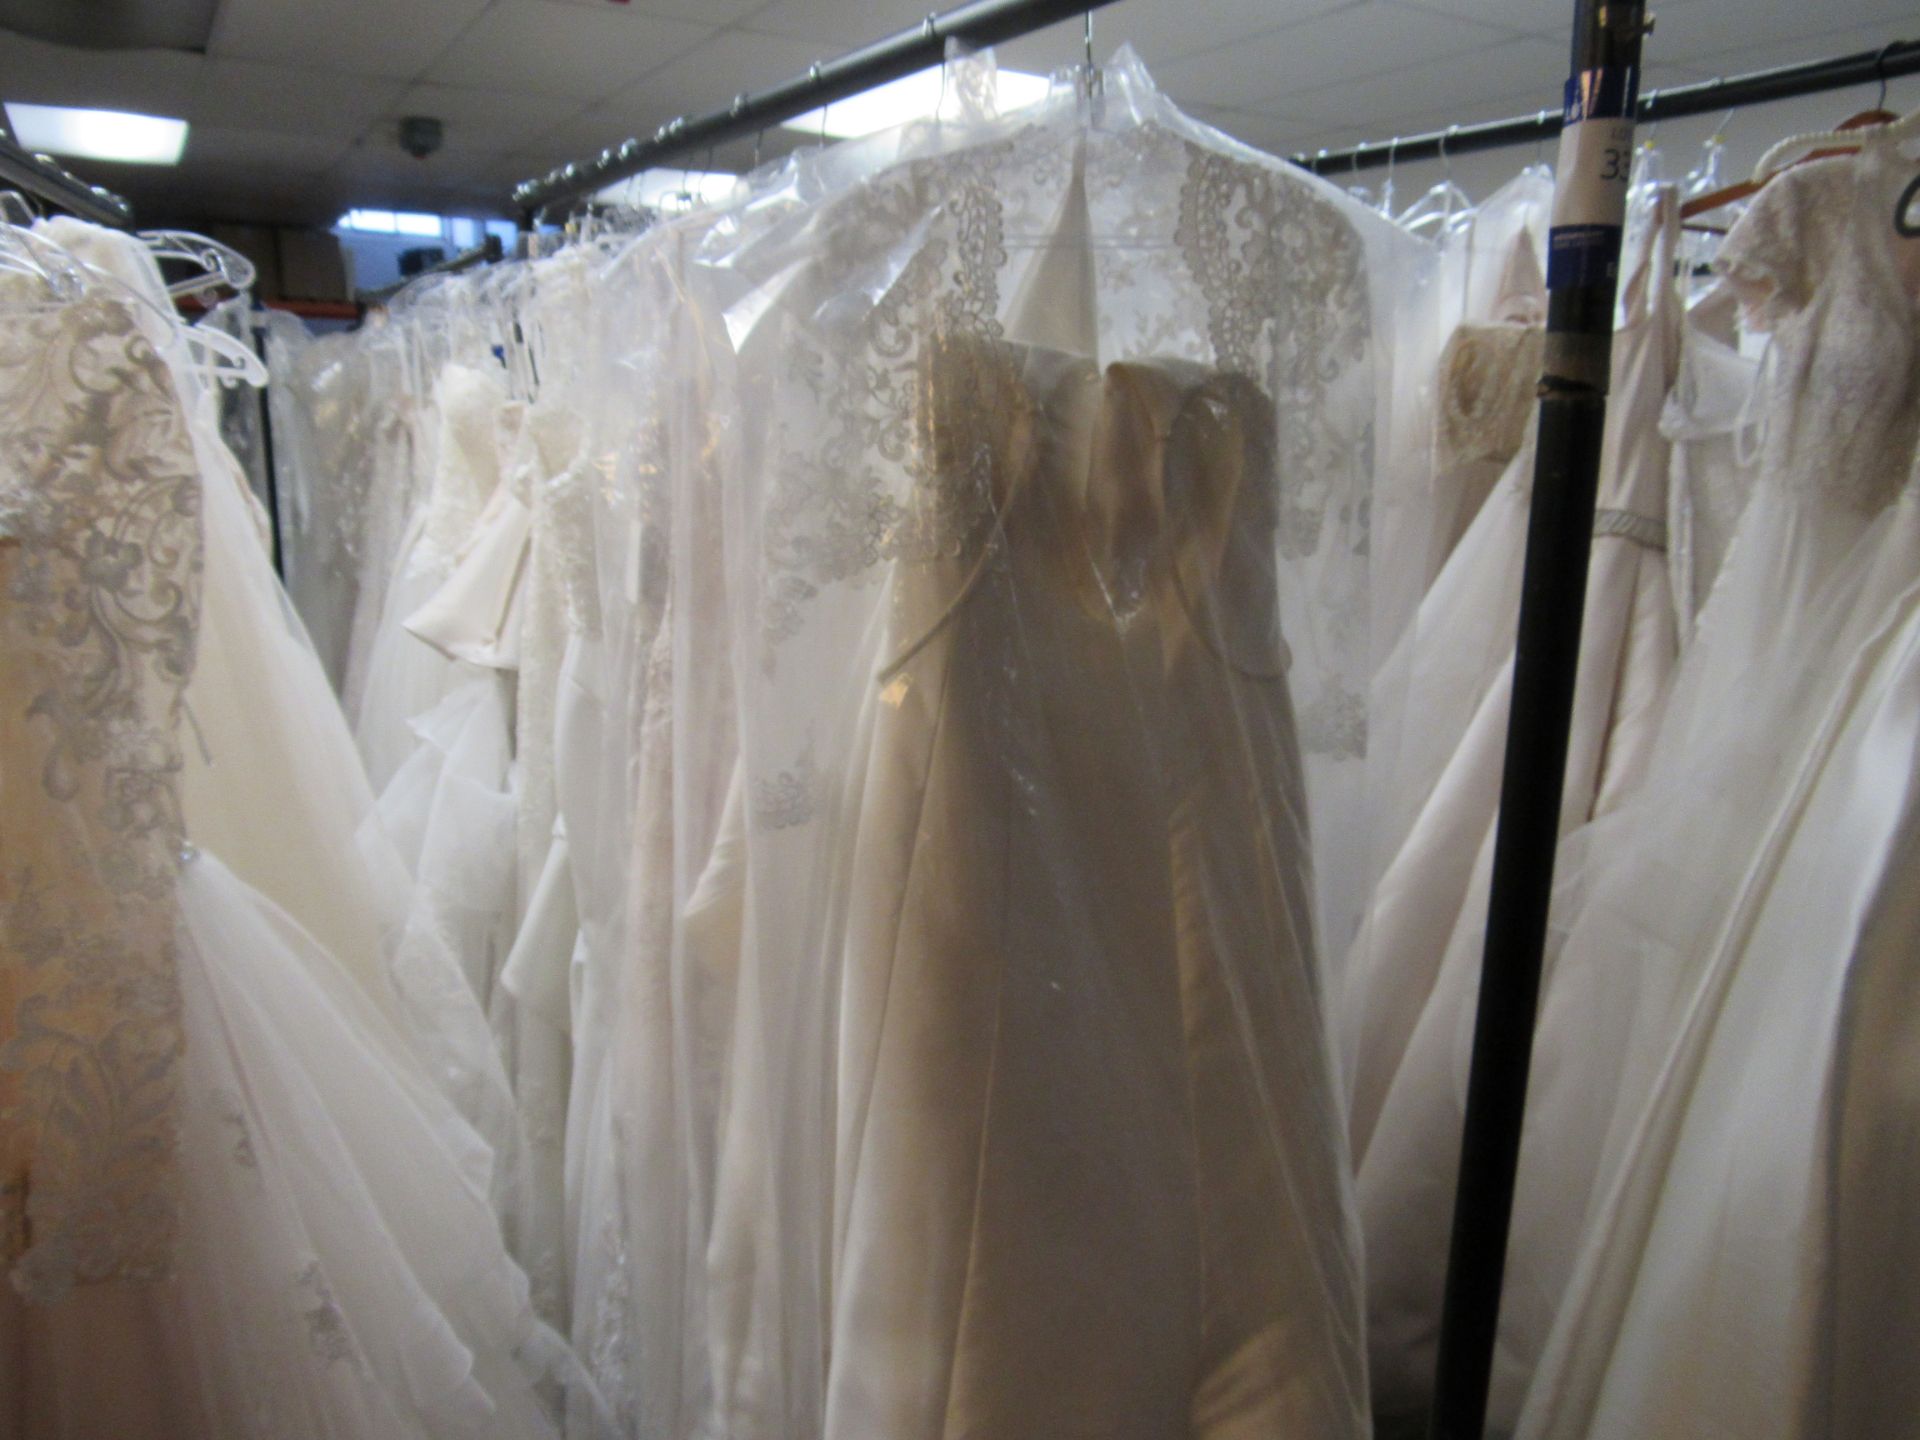 12 Bridal gowns including Eternity Brides and Adri